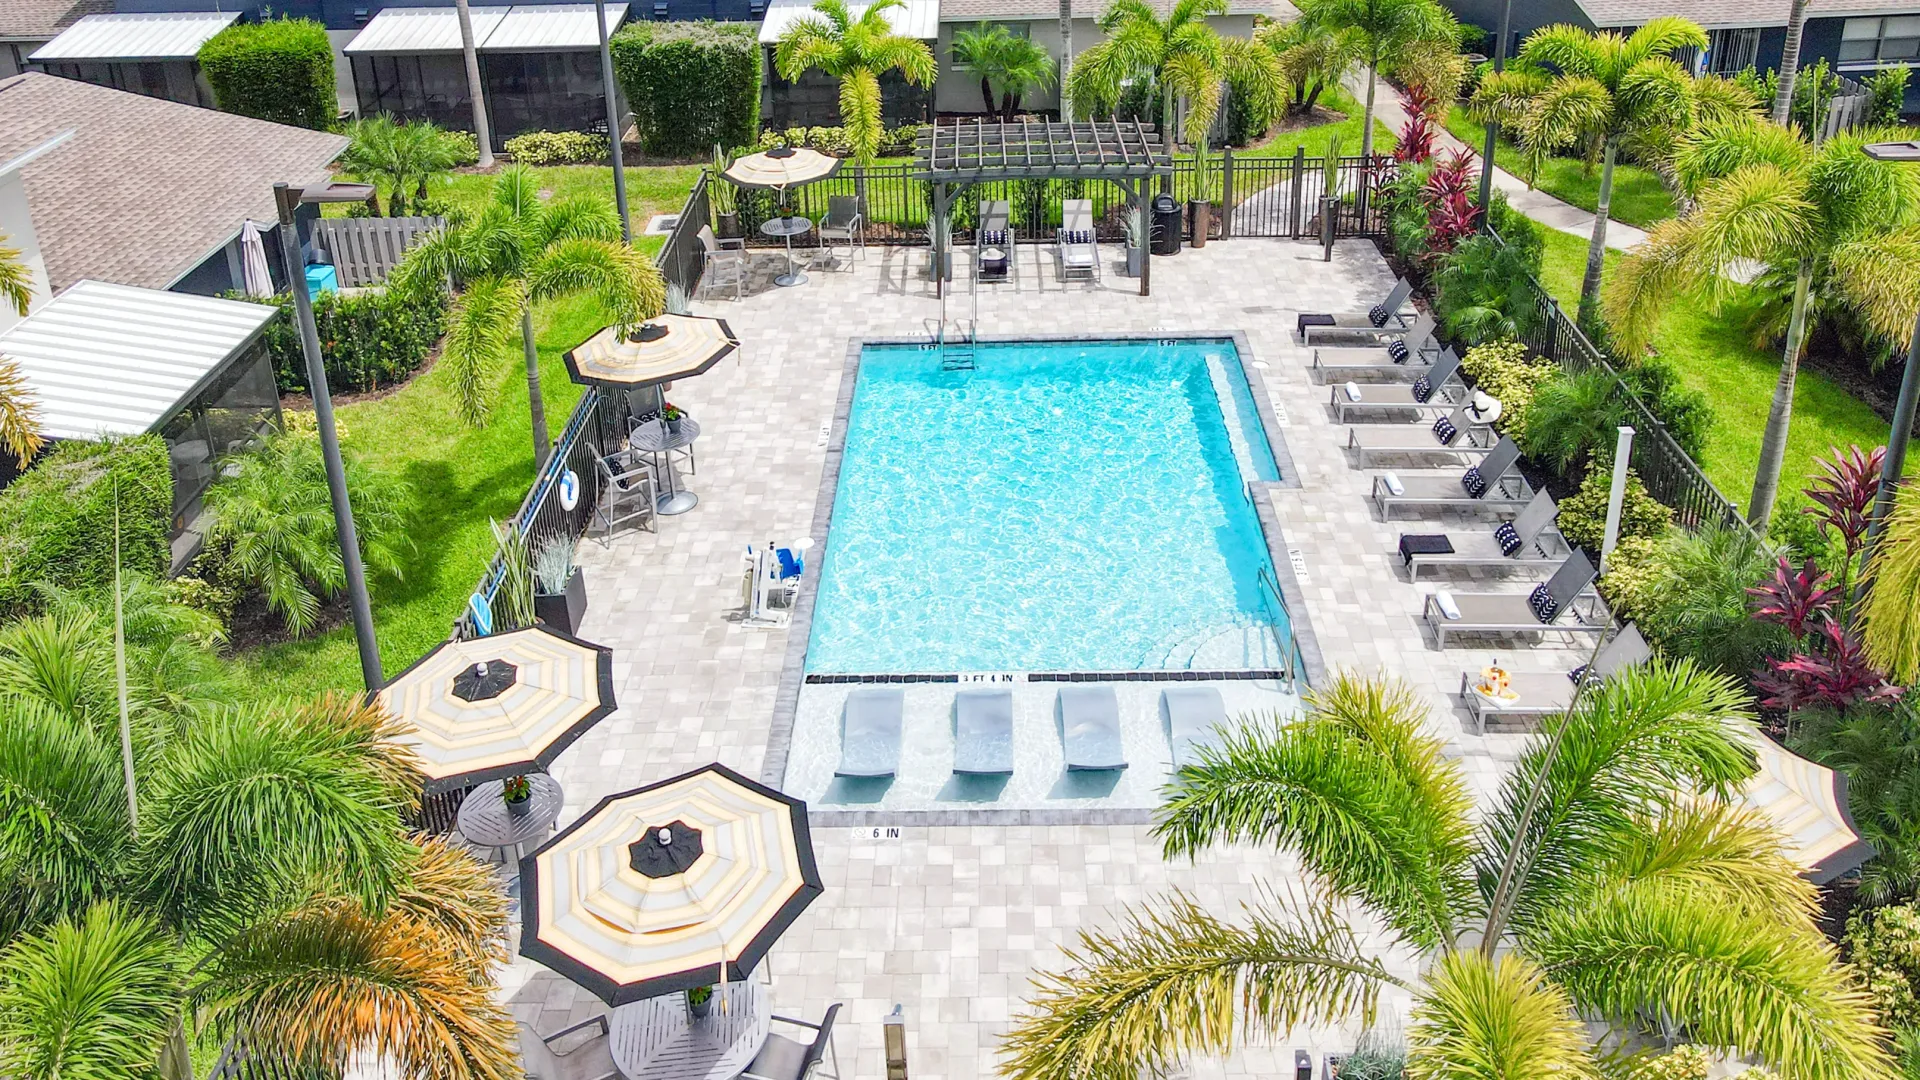 An aerial view of our glittering swimming pool with plentiful sunbeds, surrounded by lush palm trees and tropical foliage, a serene oasis in the heart of Winter Garden, Florida.